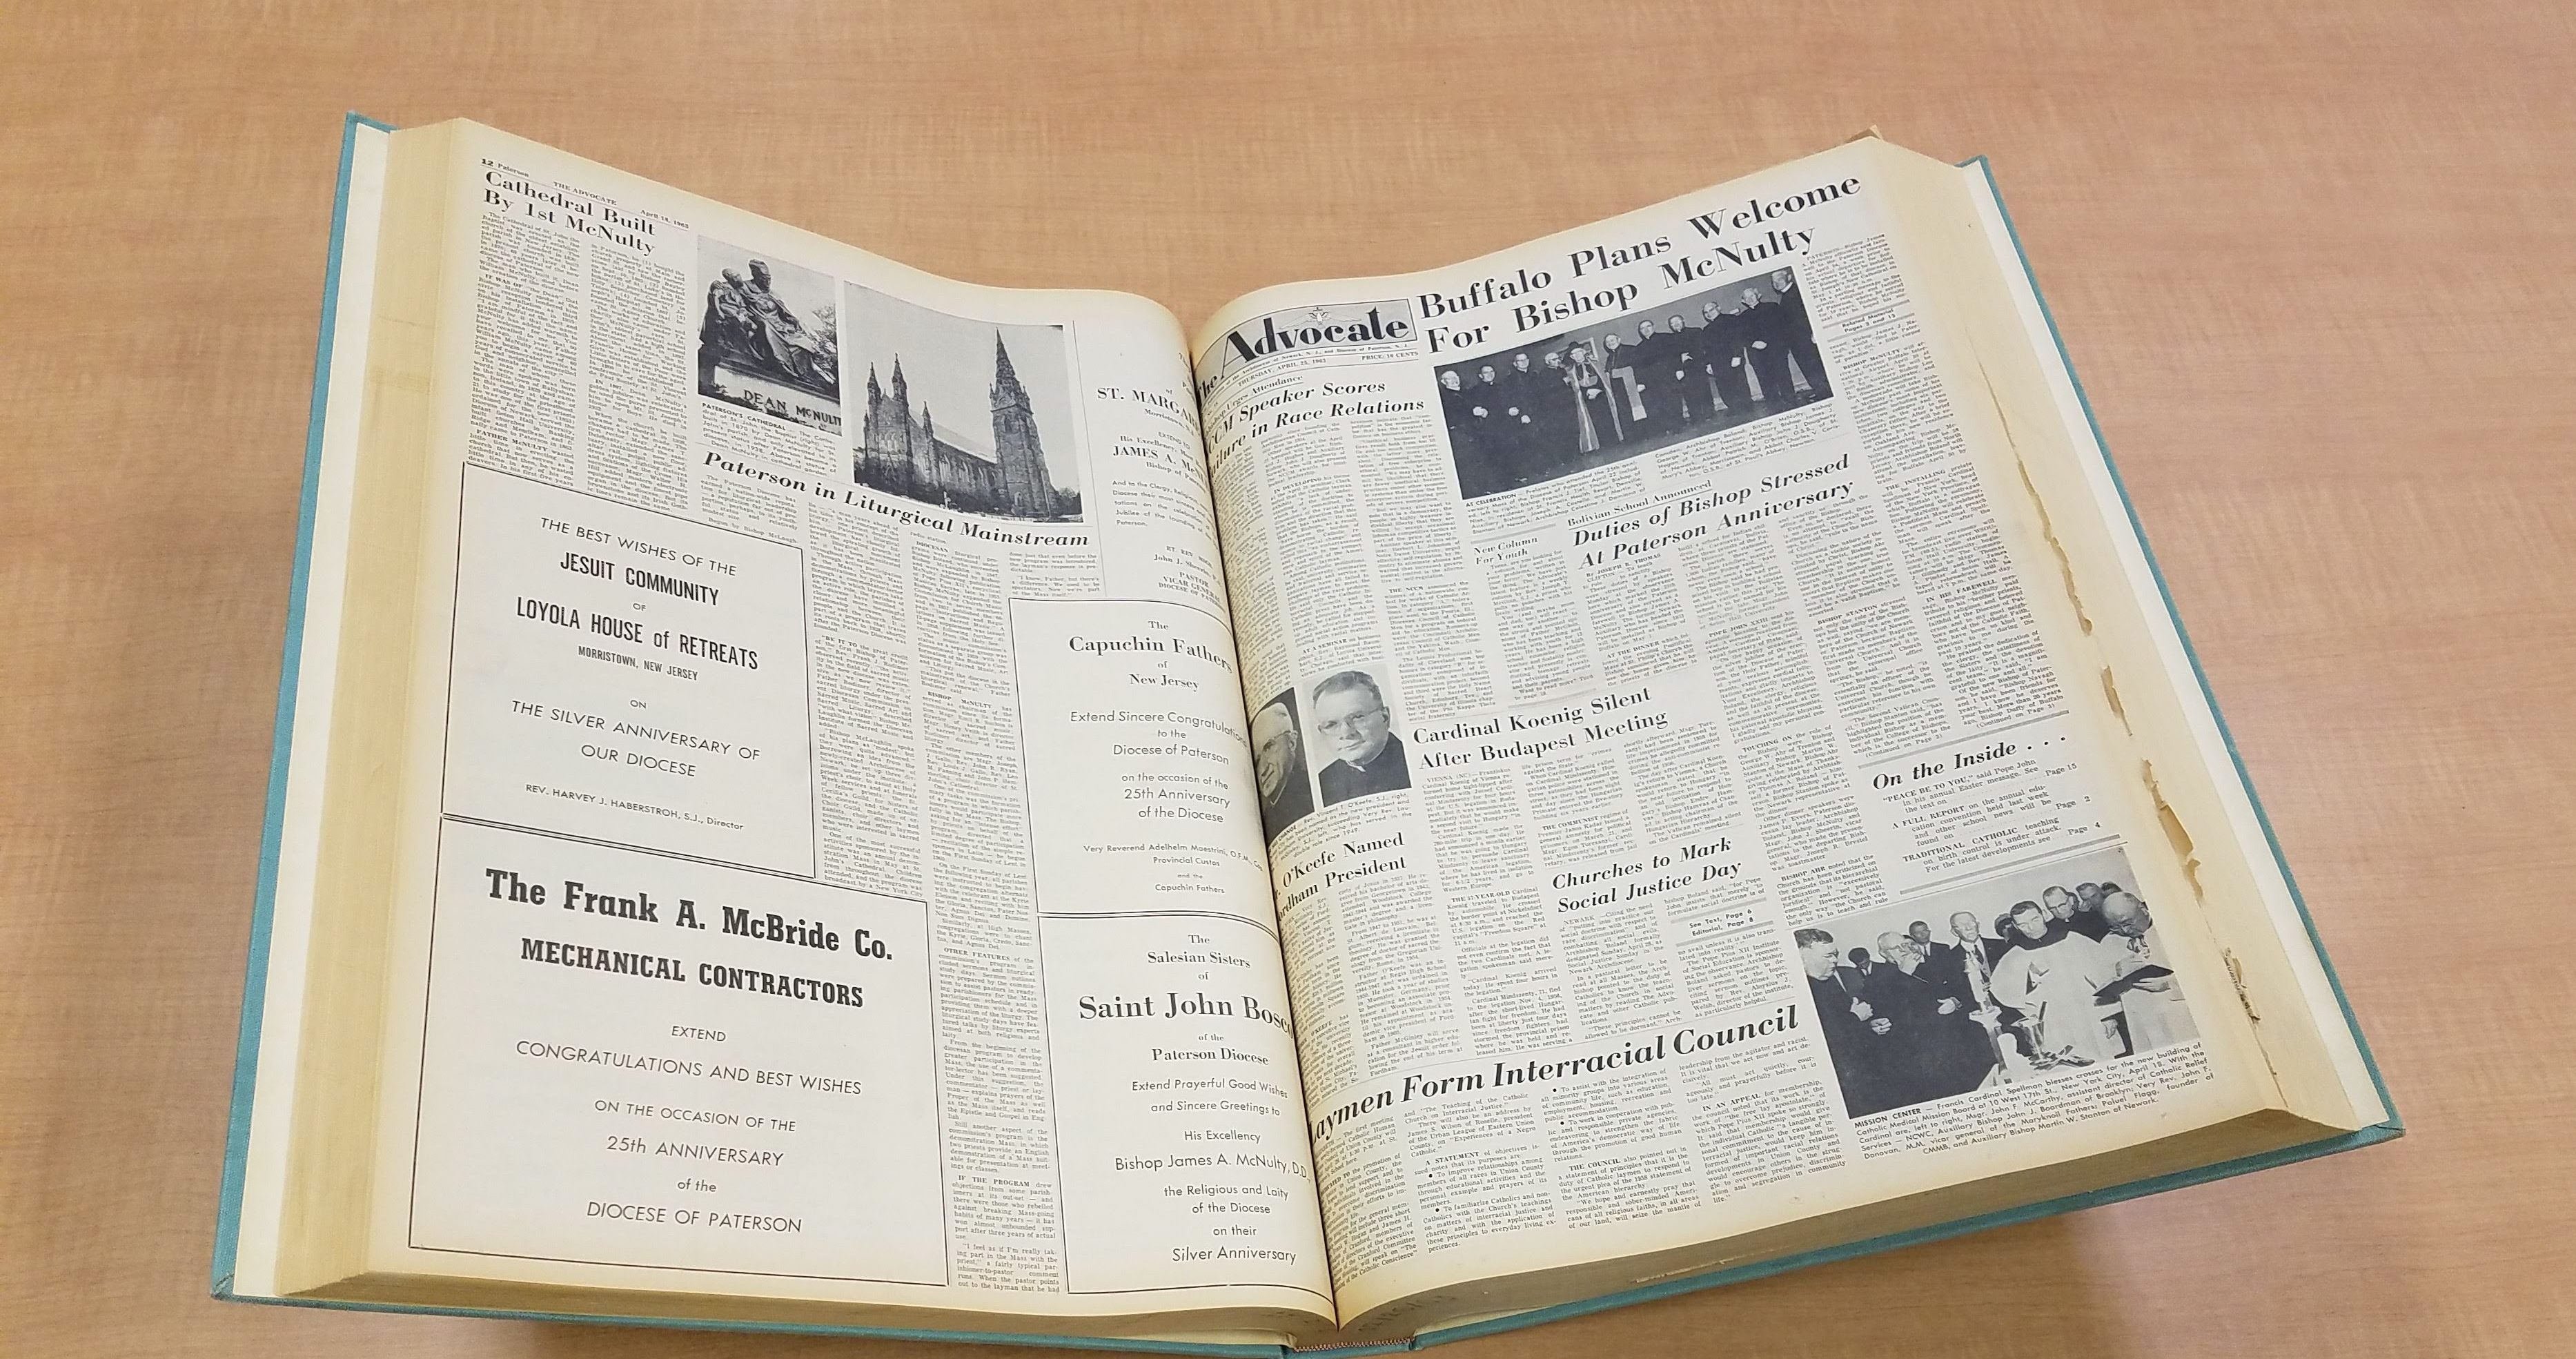 Printed and microfilm versions of the Catholic Advocate in Seton Hall University Special Collections